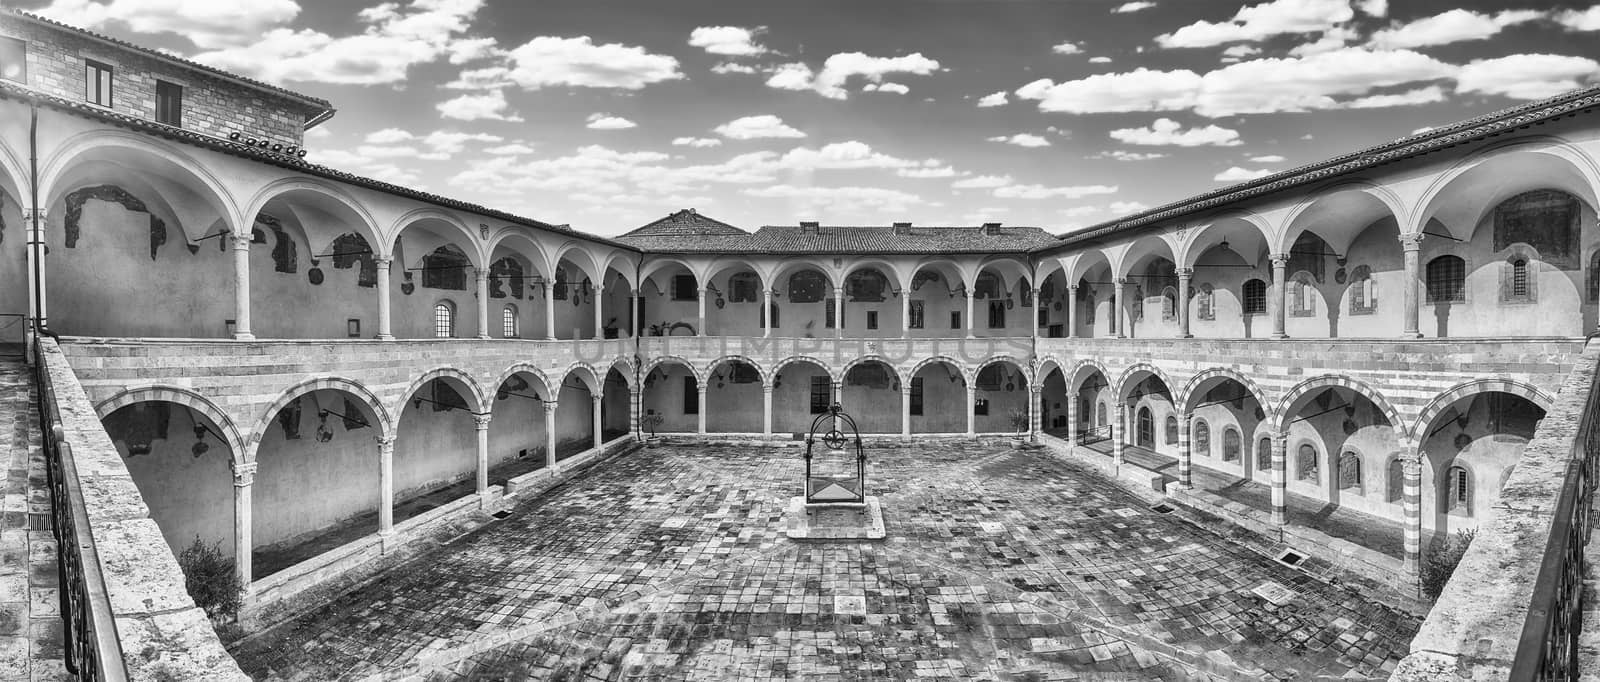 Panoramic view with the scenic courtyard in the friary of the Basilica of Saint Francis, Assisi, Italy. UNESCO World Heritage Site since 2000